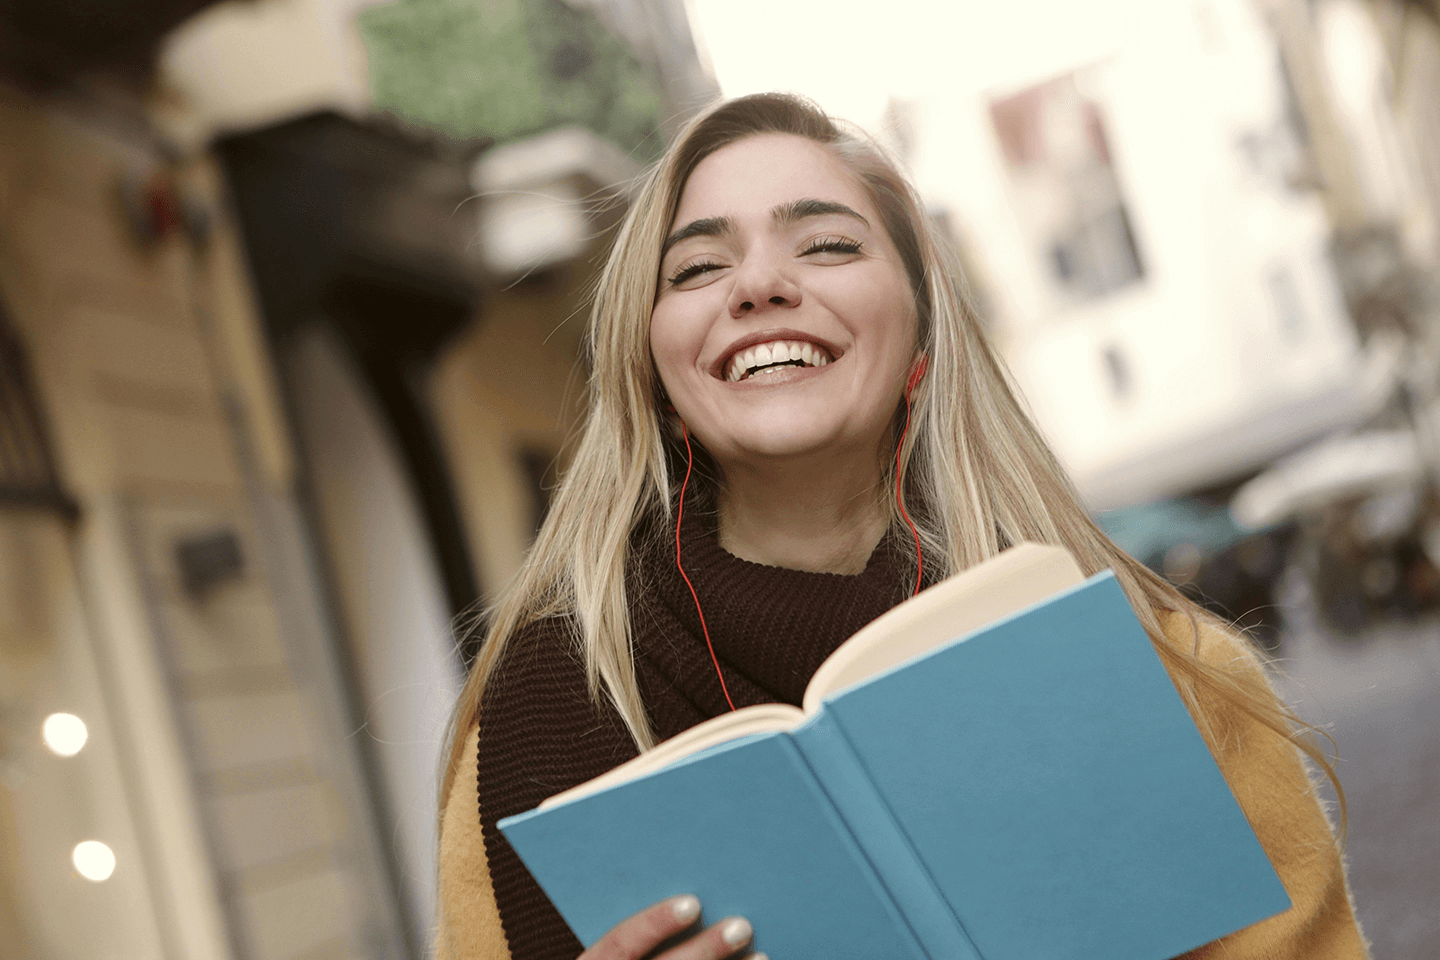 A woman smiling and holding a book.